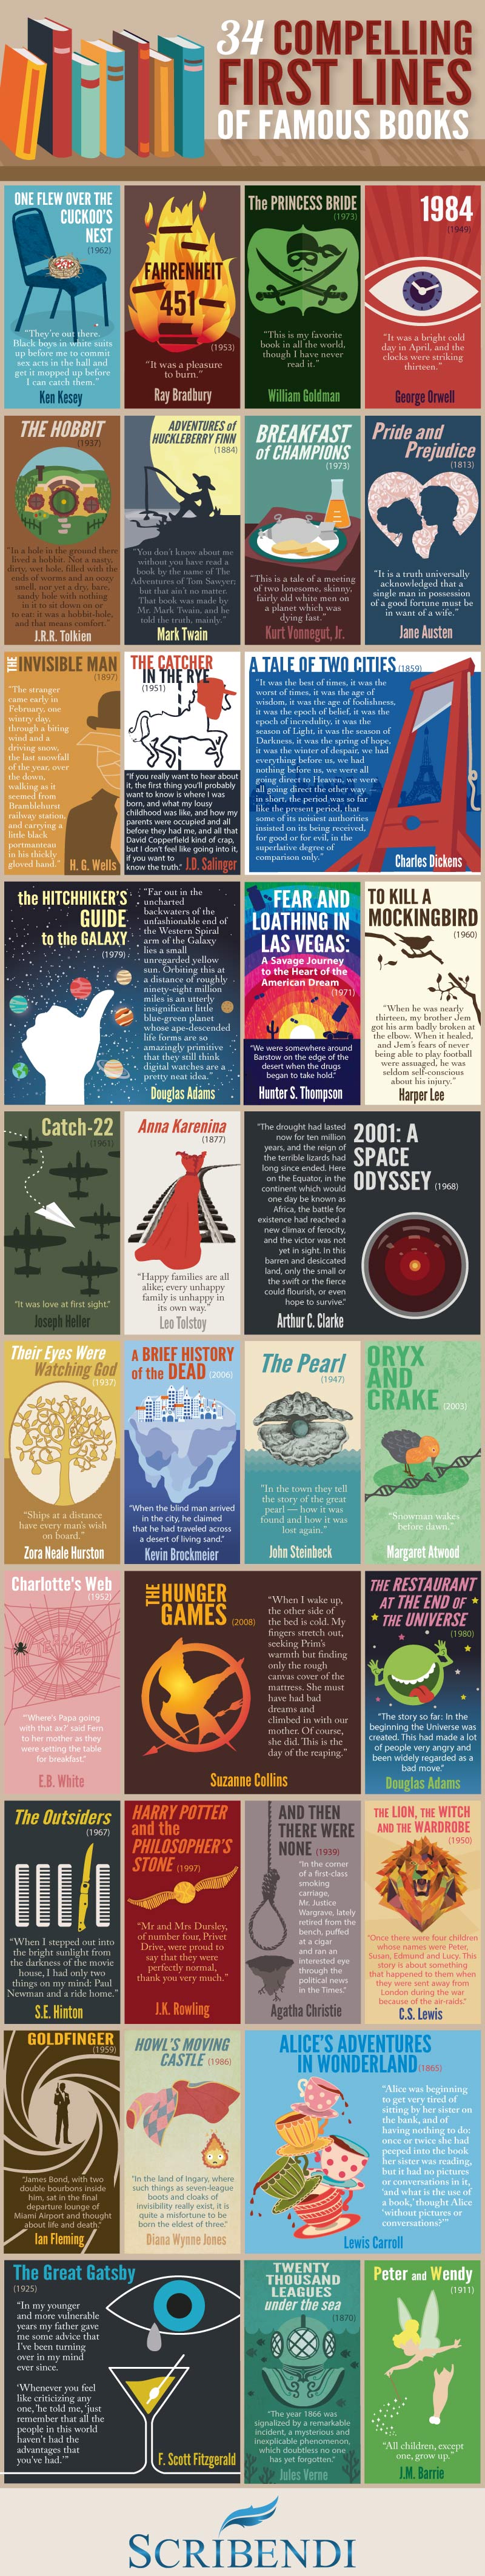 34 Compelling First Lines of Famous Books - Scribendi.com - Infographic